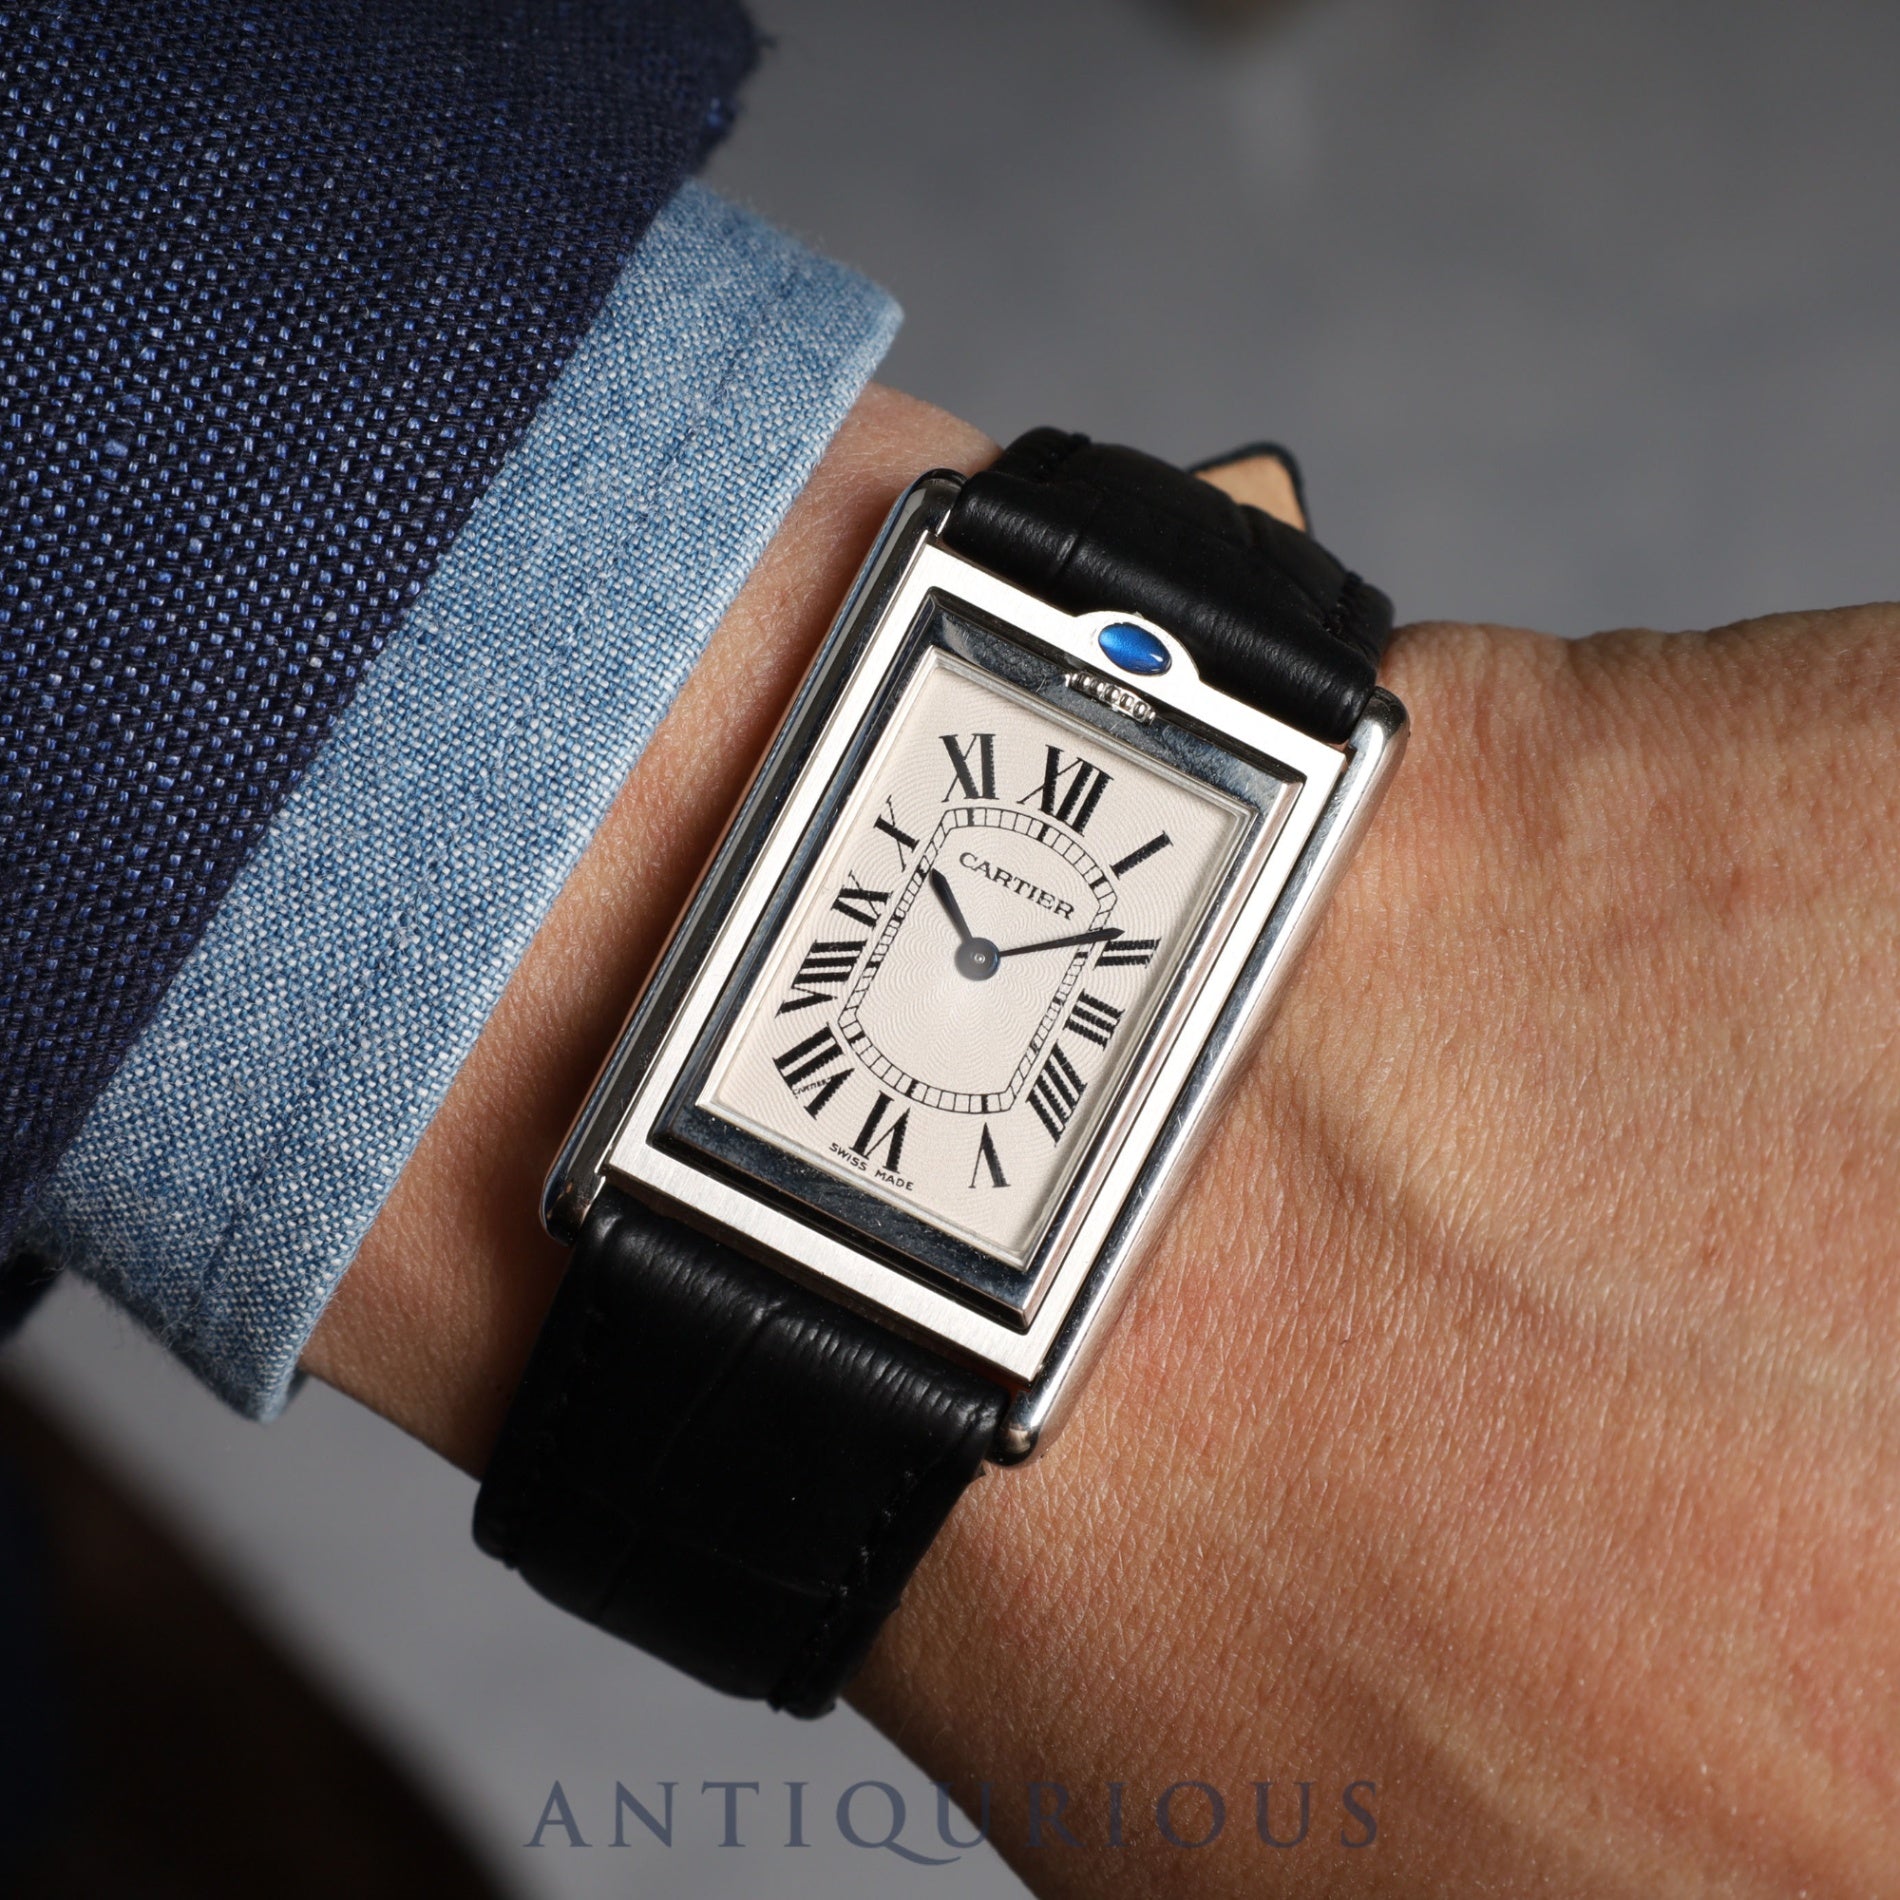 CARTIER TANK BASCULANT LM Complete service completed